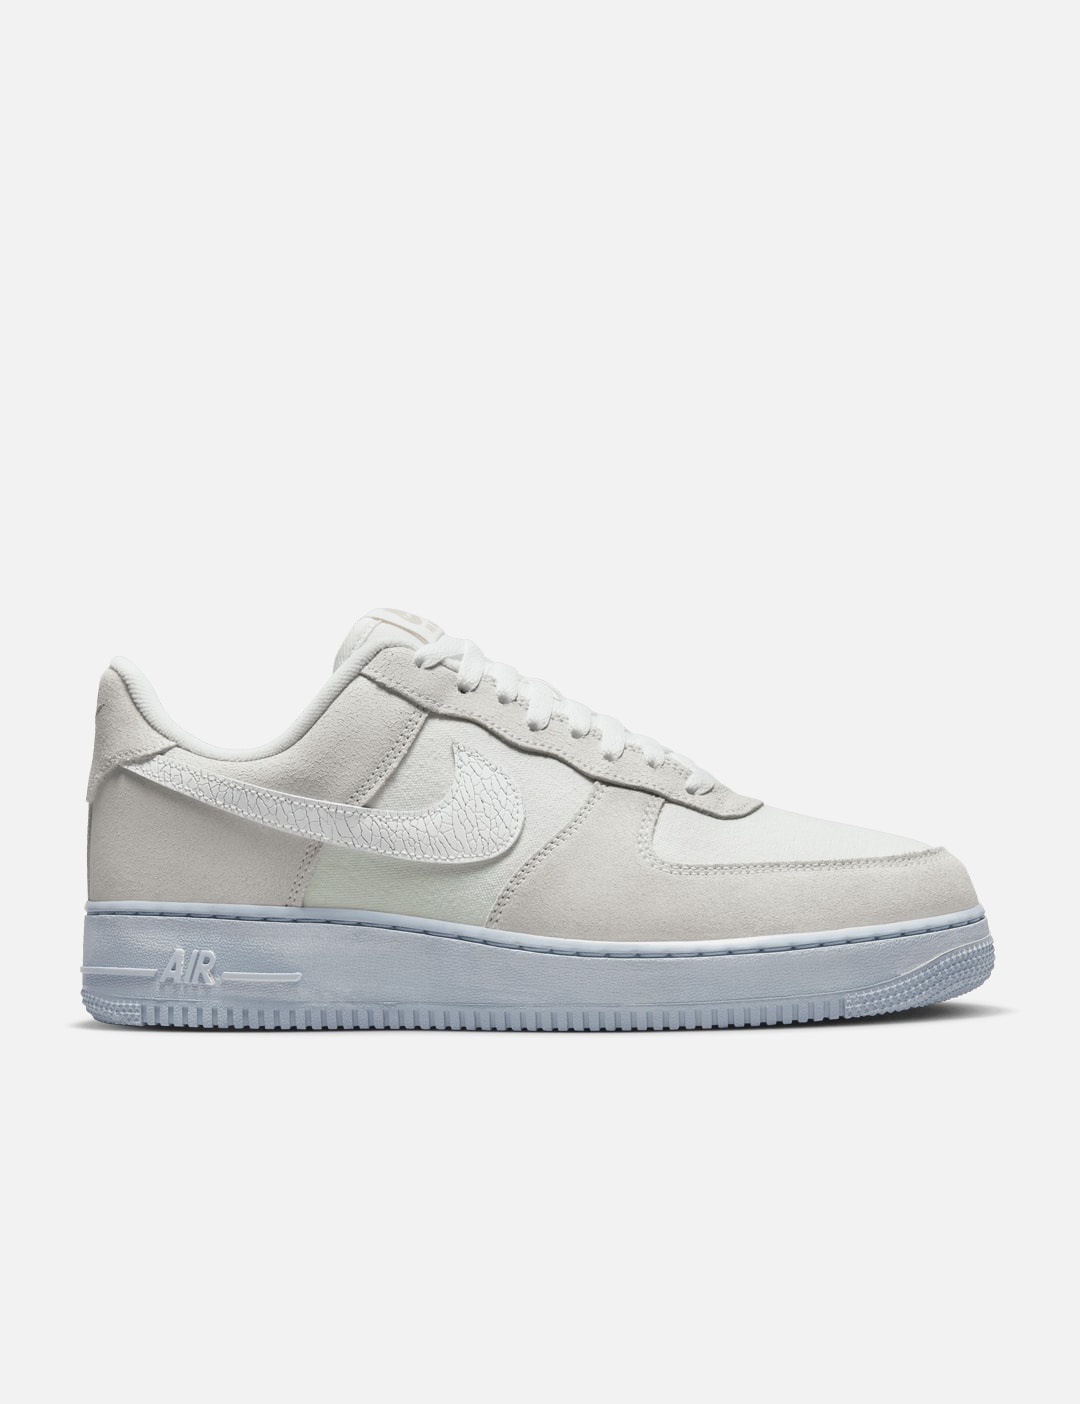 NIKE Men's Nike Air Force 1 '07 LV8 EMB SE Cracked Leather Casual Shoes